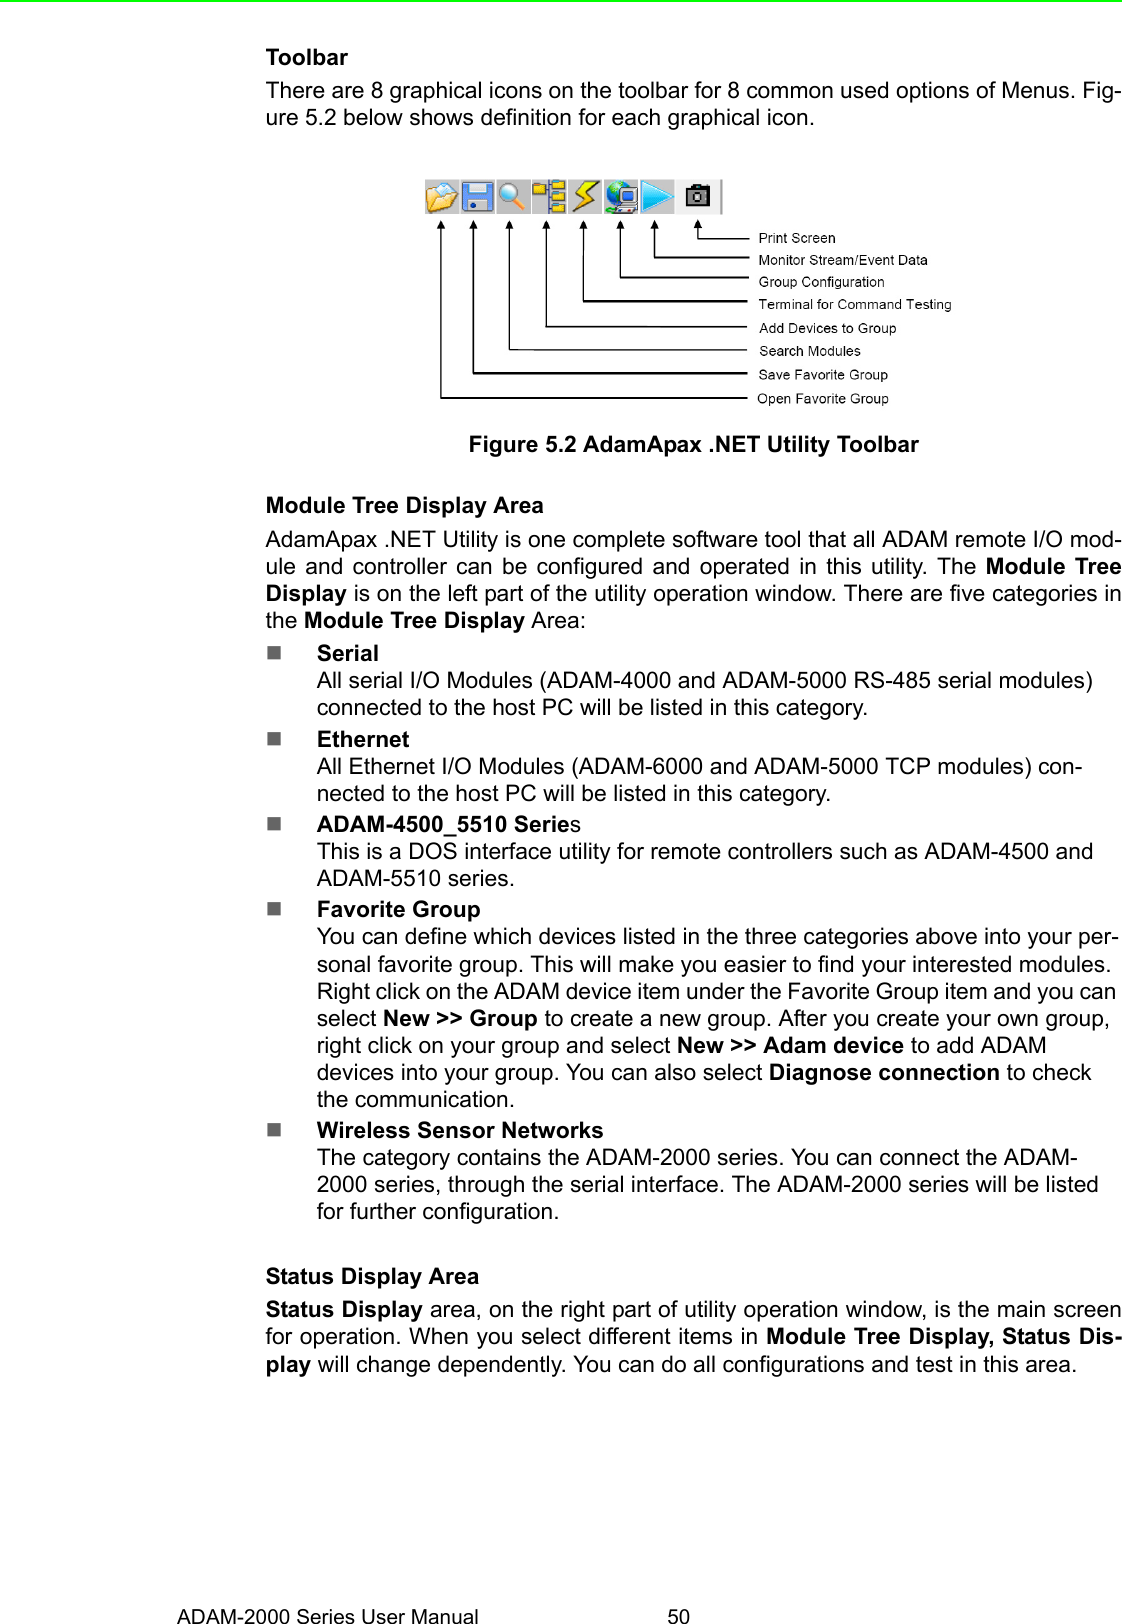 ADAM-2000 Series User Manual 50ToolbarThere are 8 graphical icons on the toolbar for 8 common used options of Menus. Fig-ure 5.2 below shows definition for each graphical icon. Figure 5.2 AdamApax .NET Utility ToolbarModule Tree Display AreaAdamApax .NET Utility is one complete software tool that all ADAM remote I/O mod-ule and controller can be configured and operated in this utility. The Module TreeDisplay is on the left part of the utility operation window. There are five categories inthe Module Tree Display Area:SerialAll serial I/O Modules (ADAM-4000 and ADAM-5000 RS-485 serial modules) connected to the host PC will be listed in this category.EthernetAll Ethernet I/O Modules (ADAM-6000 and ADAM-5000 TCP modules) con-nected to the host PC will be listed in this category. ADAM-4500_5510 SeriesThis is a DOS interface utility for remote controllers such as ADAM-4500 and ADAM-5510 series. Favorite GroupYou can define which devices listed in the three categories above into your per-sonal favorite group. This will make you easier to find your interested modules. Right click on the ADAM device item under the Favorite Group item and you can select New &gt;&gt; Group to create a new group. After you create your own group, right click on your group and select New &gt;&gt; Adam device to add ADAM devices into your group. You can also select Diagnose connection to check the communication. Wireless Sensor NetworksThe category contains the ADAM-2000 series. You can connect the ADAM-2000 series, through the serial interface. The ADAM-2000 series will be listed for further configuration.Status Display AreaStatus Display area, on the right part of utility operation window, is the main screenfor operation. When you select different items in Module Tree Display, Status Dis-play will change dependently. You can do all configurations and test in this area. 